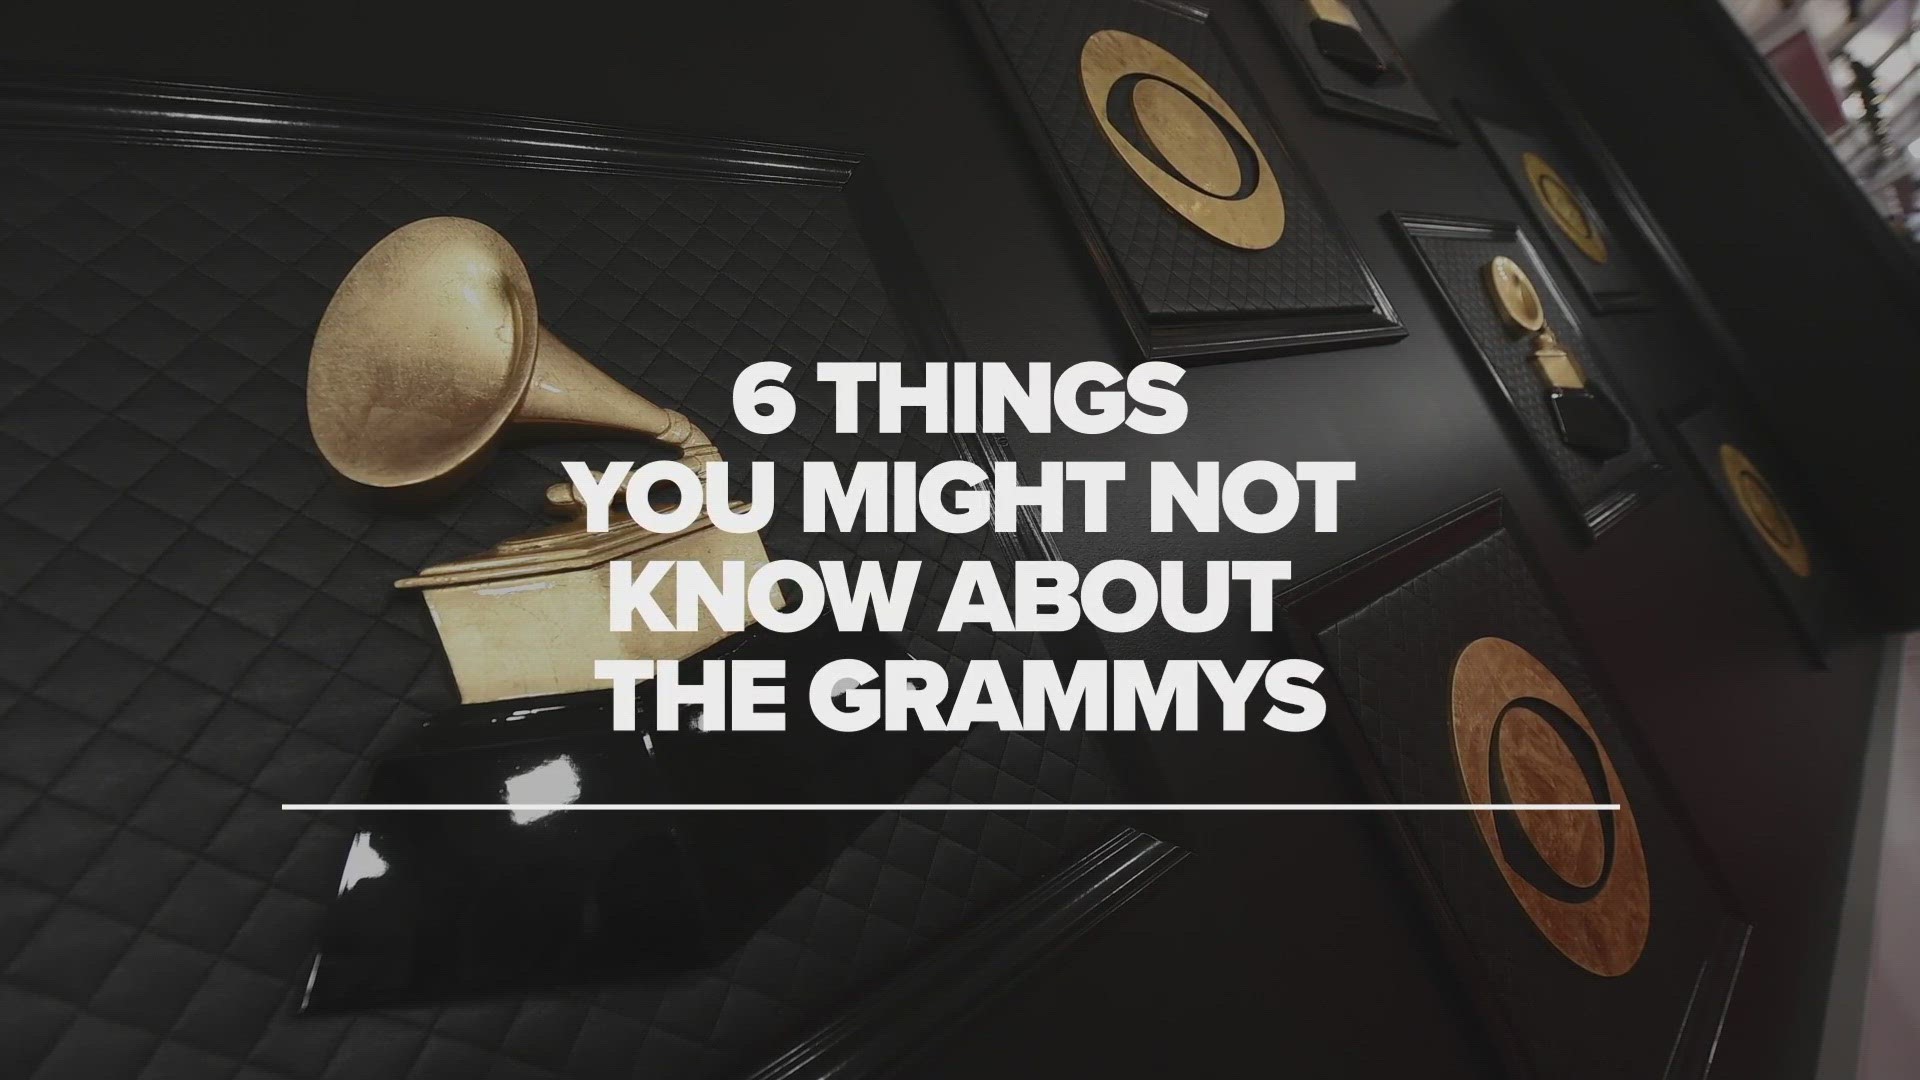 As the Grammy Awards gets underway this Sunday, take a look at some of the lesser known facts about music's biggest night.